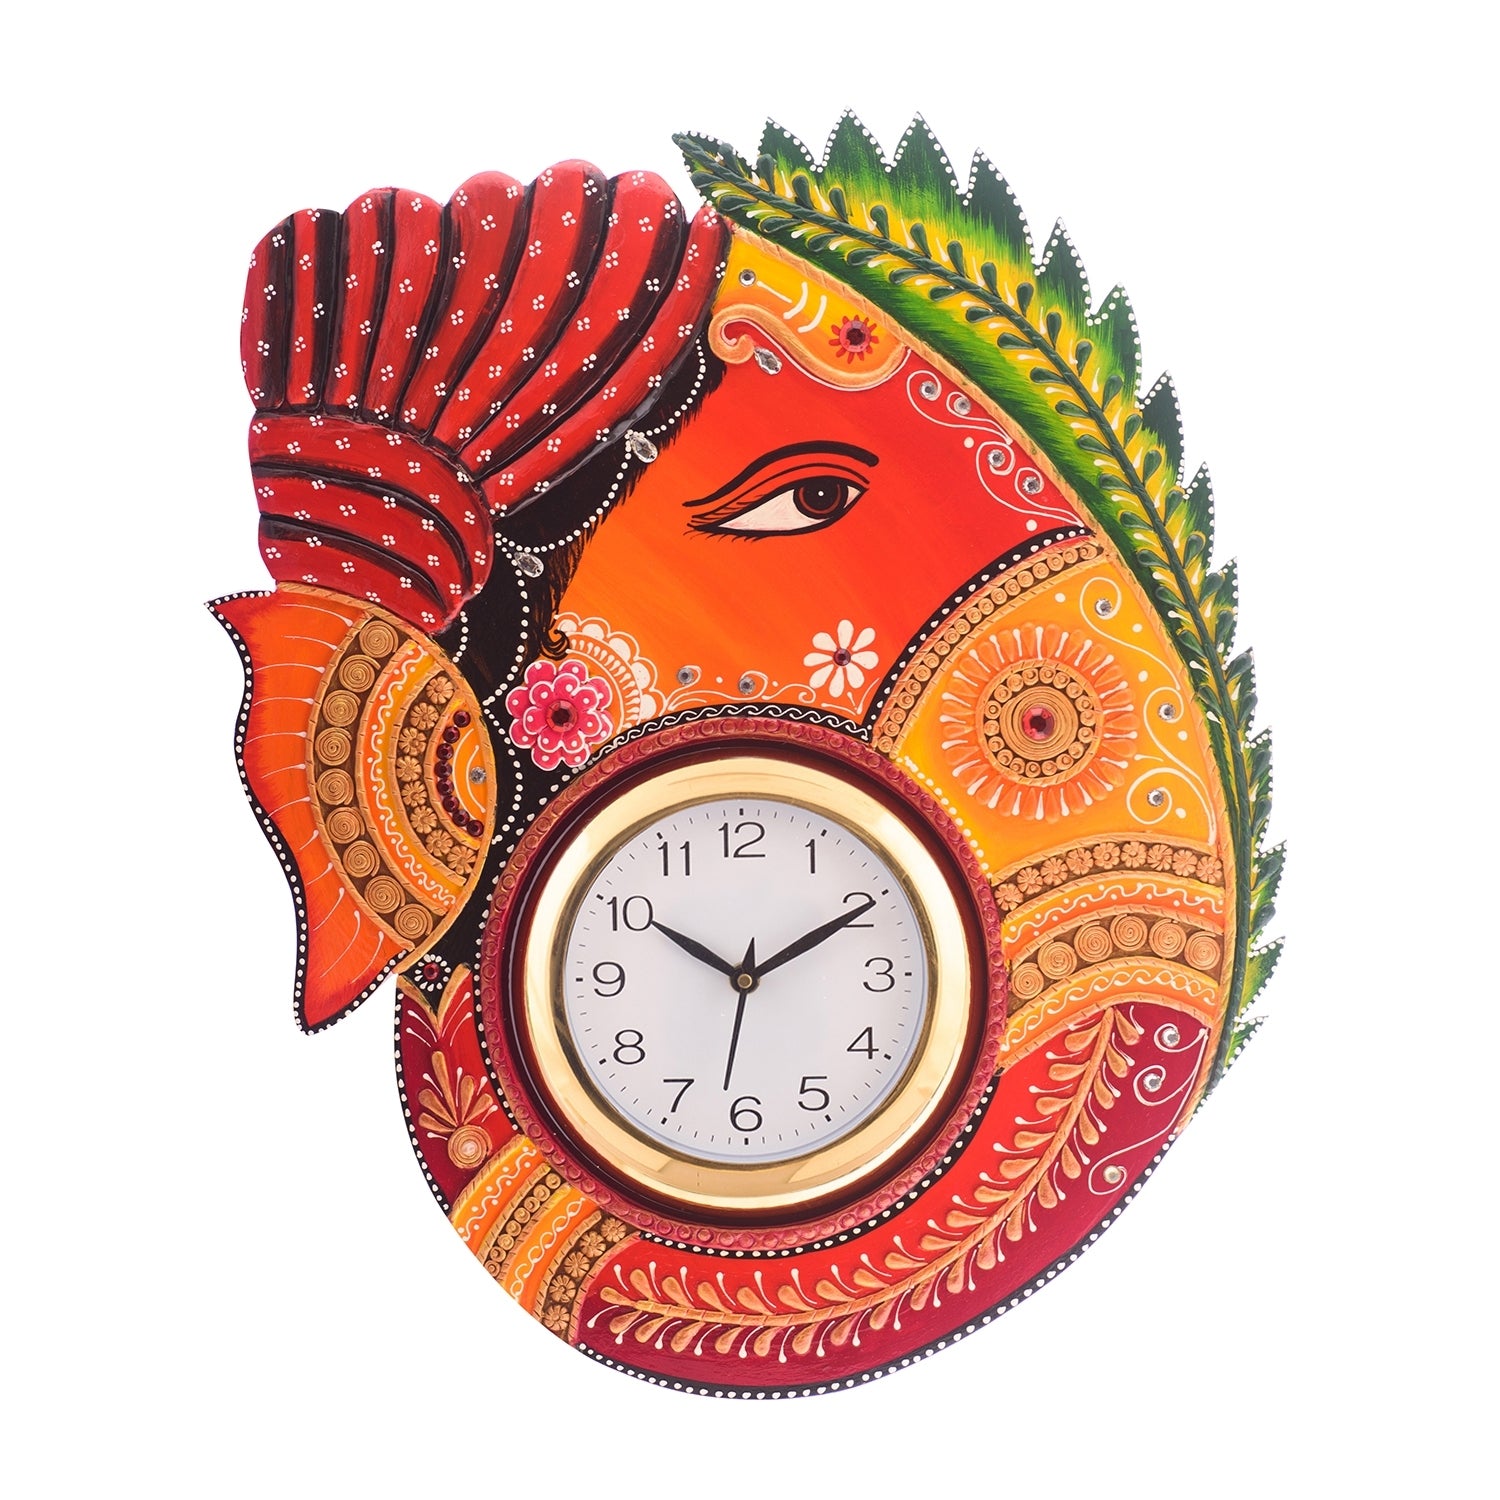 Turban Lord Ganesha Colorful Wooden Handcrafted Wooden Wall Clock (H - 18Inch)